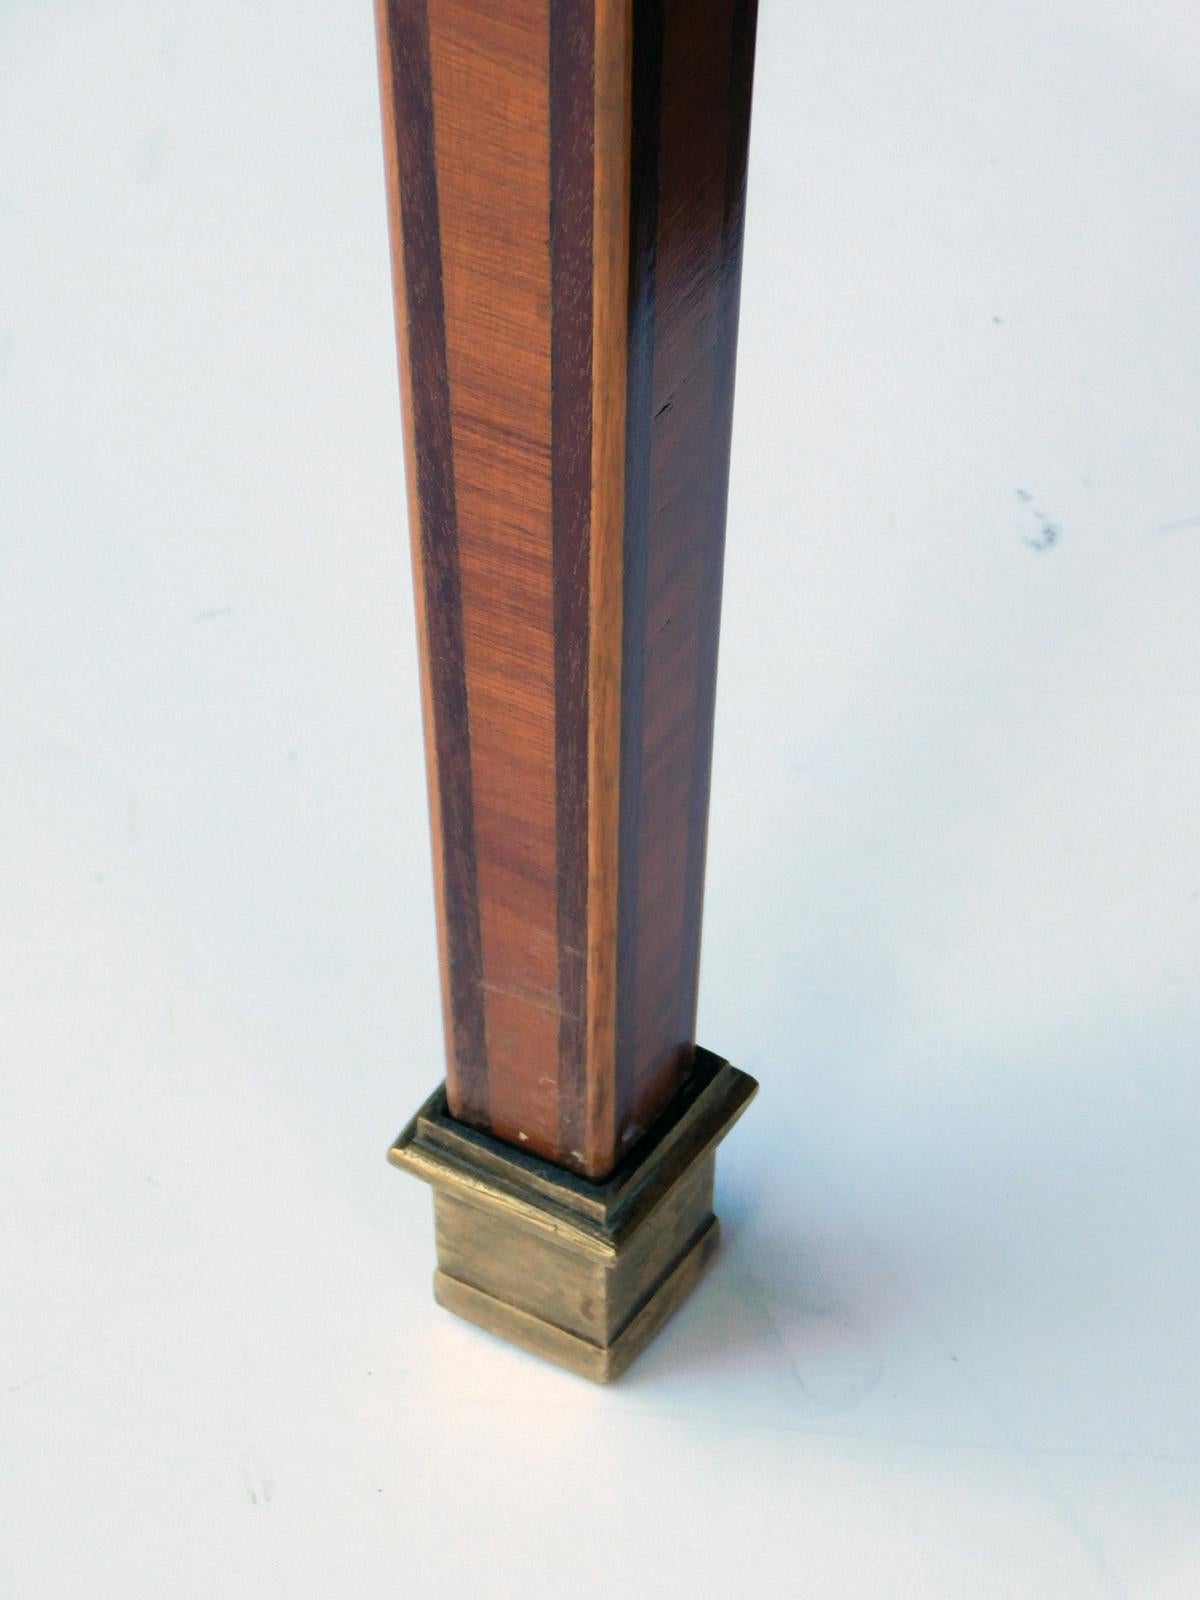 The cross-banded book-matched pie slice veneered oval top with brass mounted perimeter band over a single drawer apron decorated with marquetry inlay; raised on square legs tapering to bronze sabots; oak secondary wood.